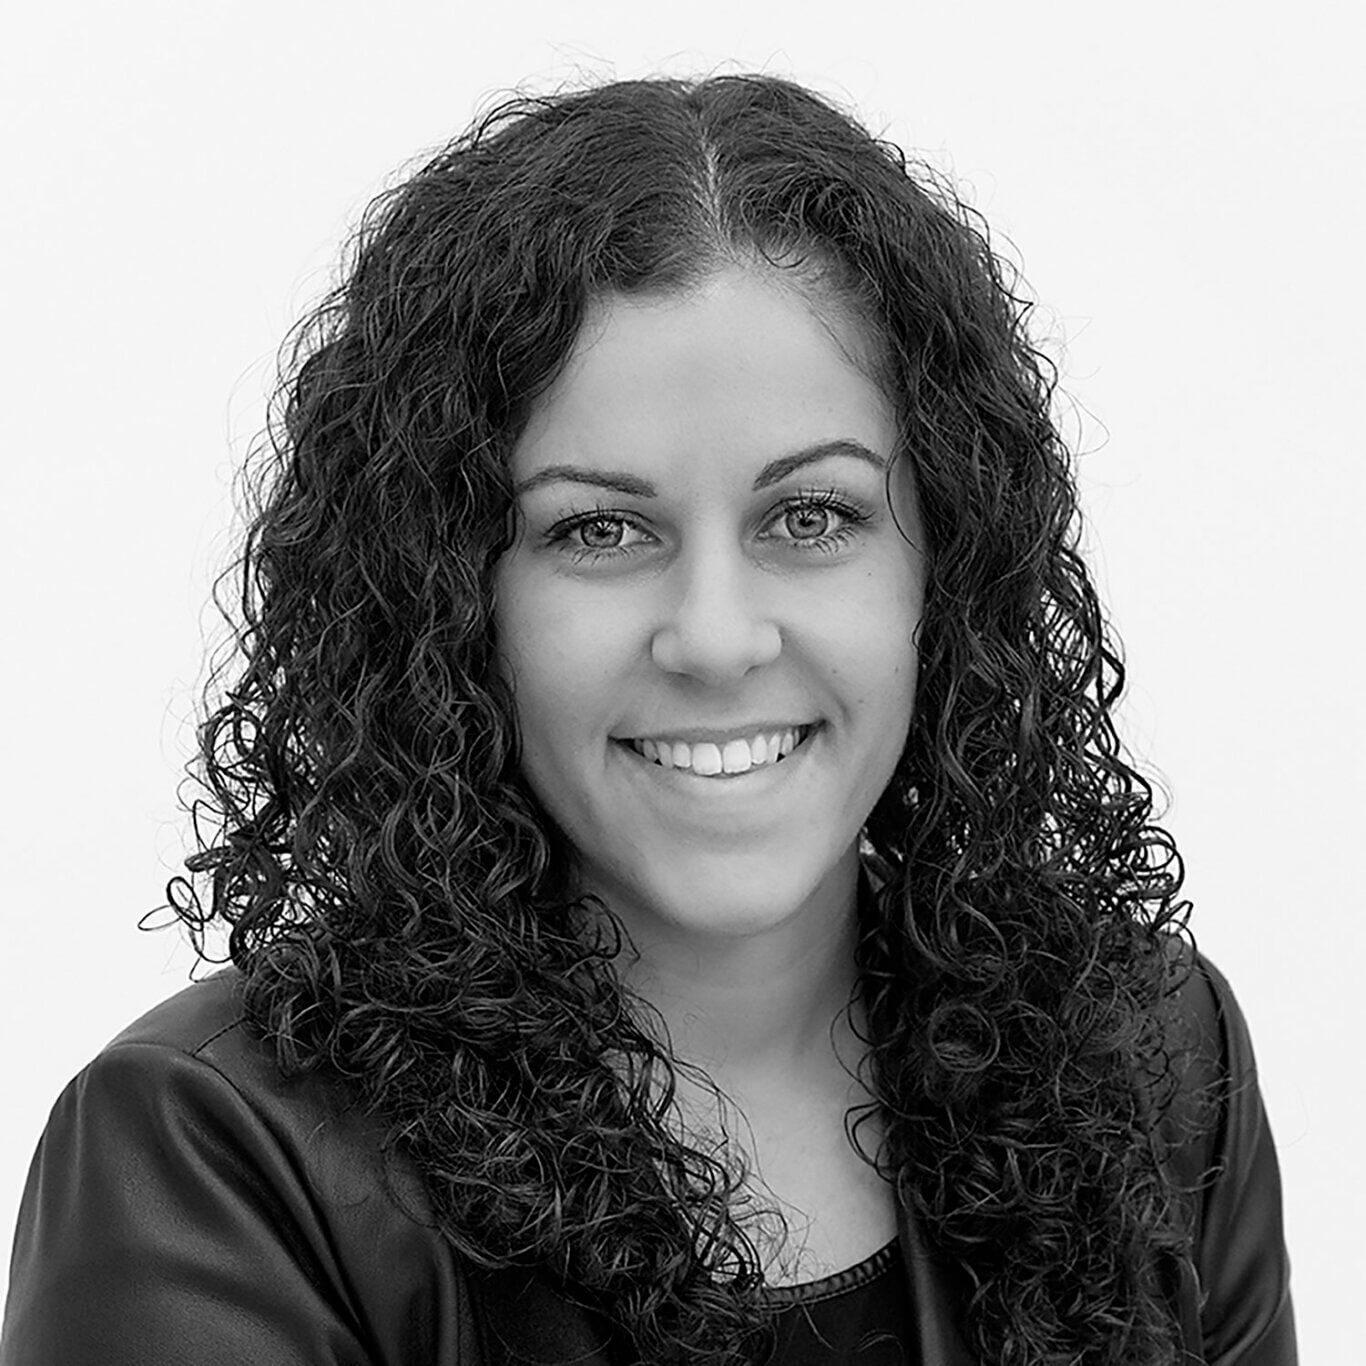 A black and white headshot of a woman with light skin tone, long dark curly hair, long eyelashes, and thin arched eyebrows. Viewed from the chest up, she has a wide smile and wears a black blazer over a black blouse, in front of a white background.